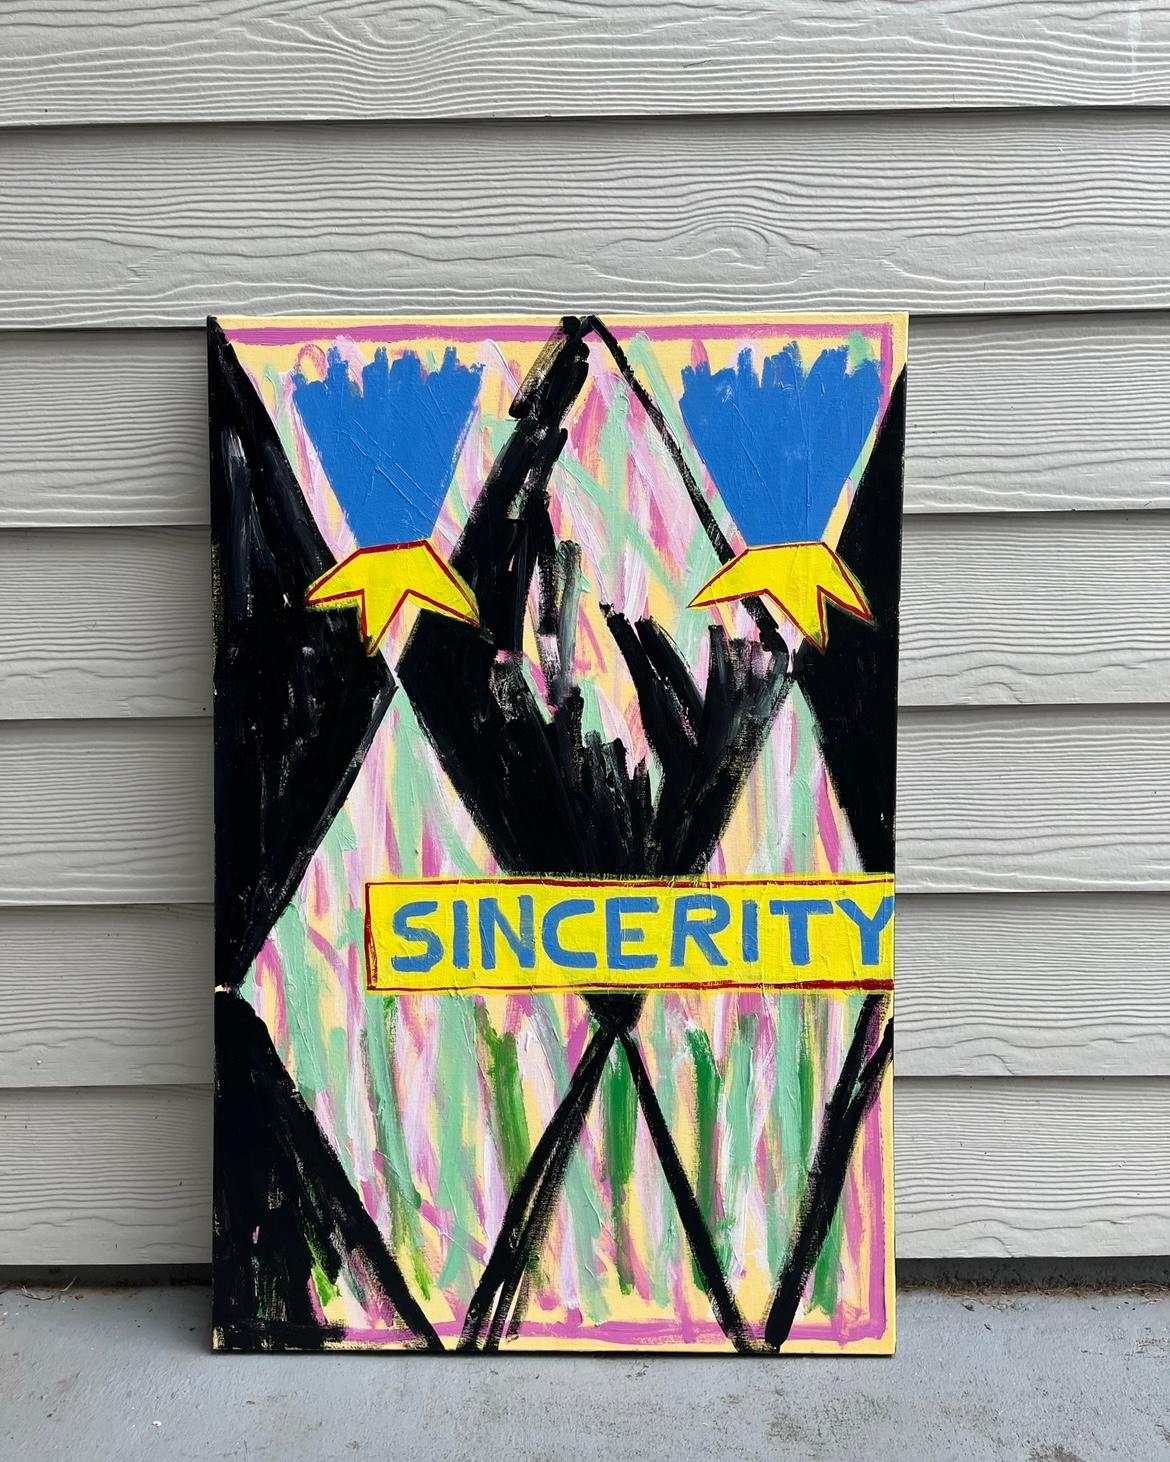 Blair Gallacher Abstract Painting - “Sincerity”